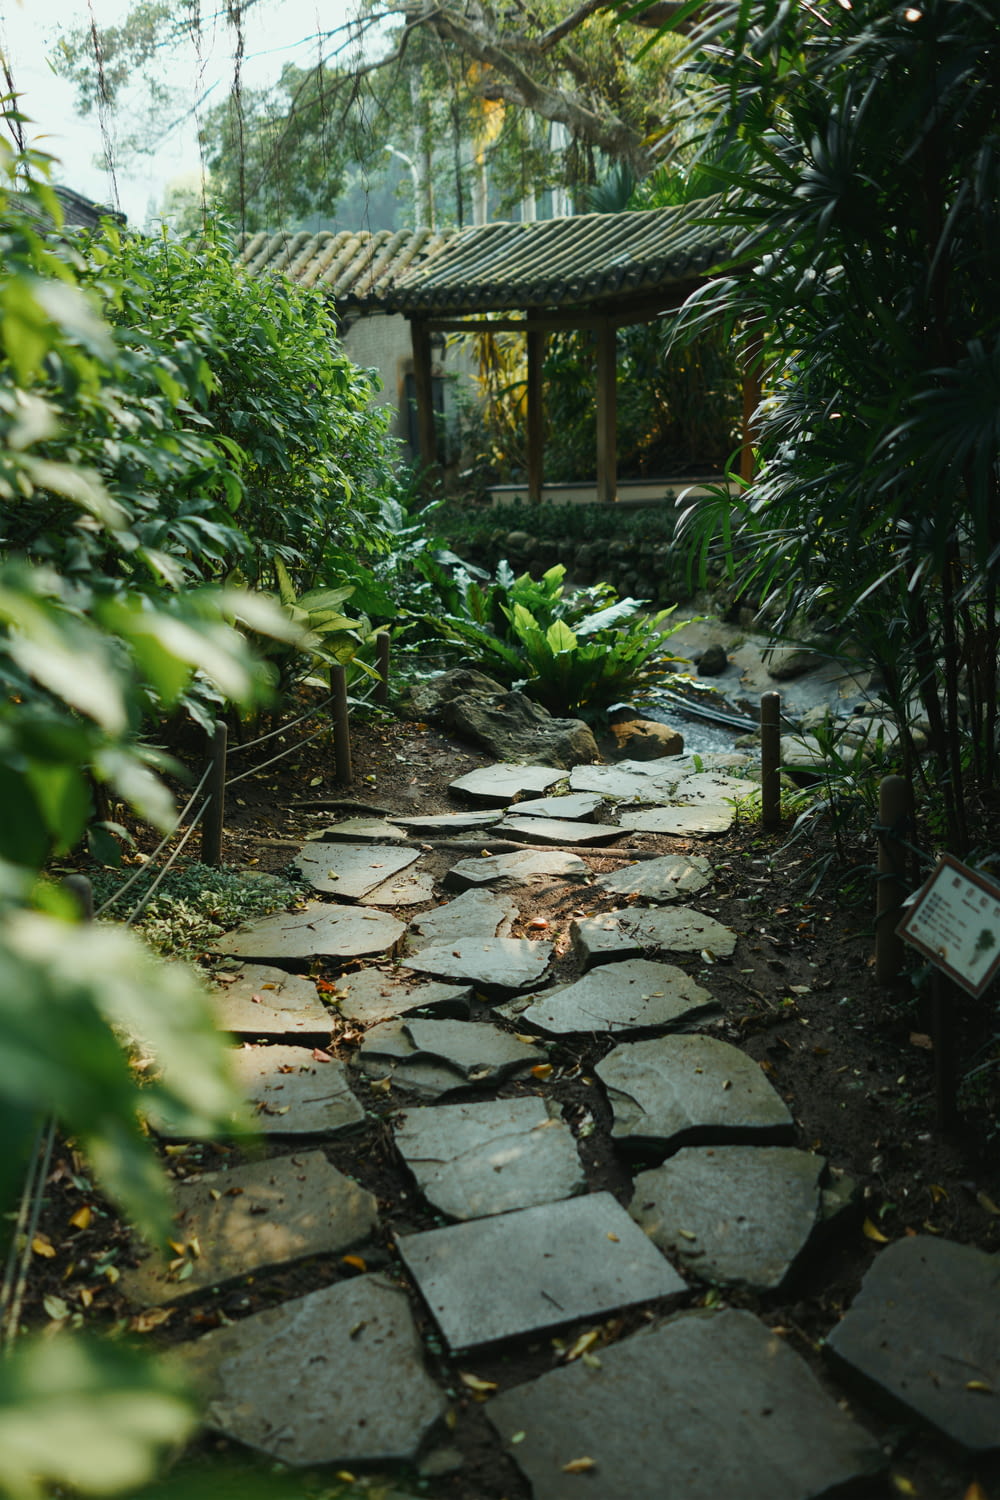 a stone path in a garden with a gazebo in the background